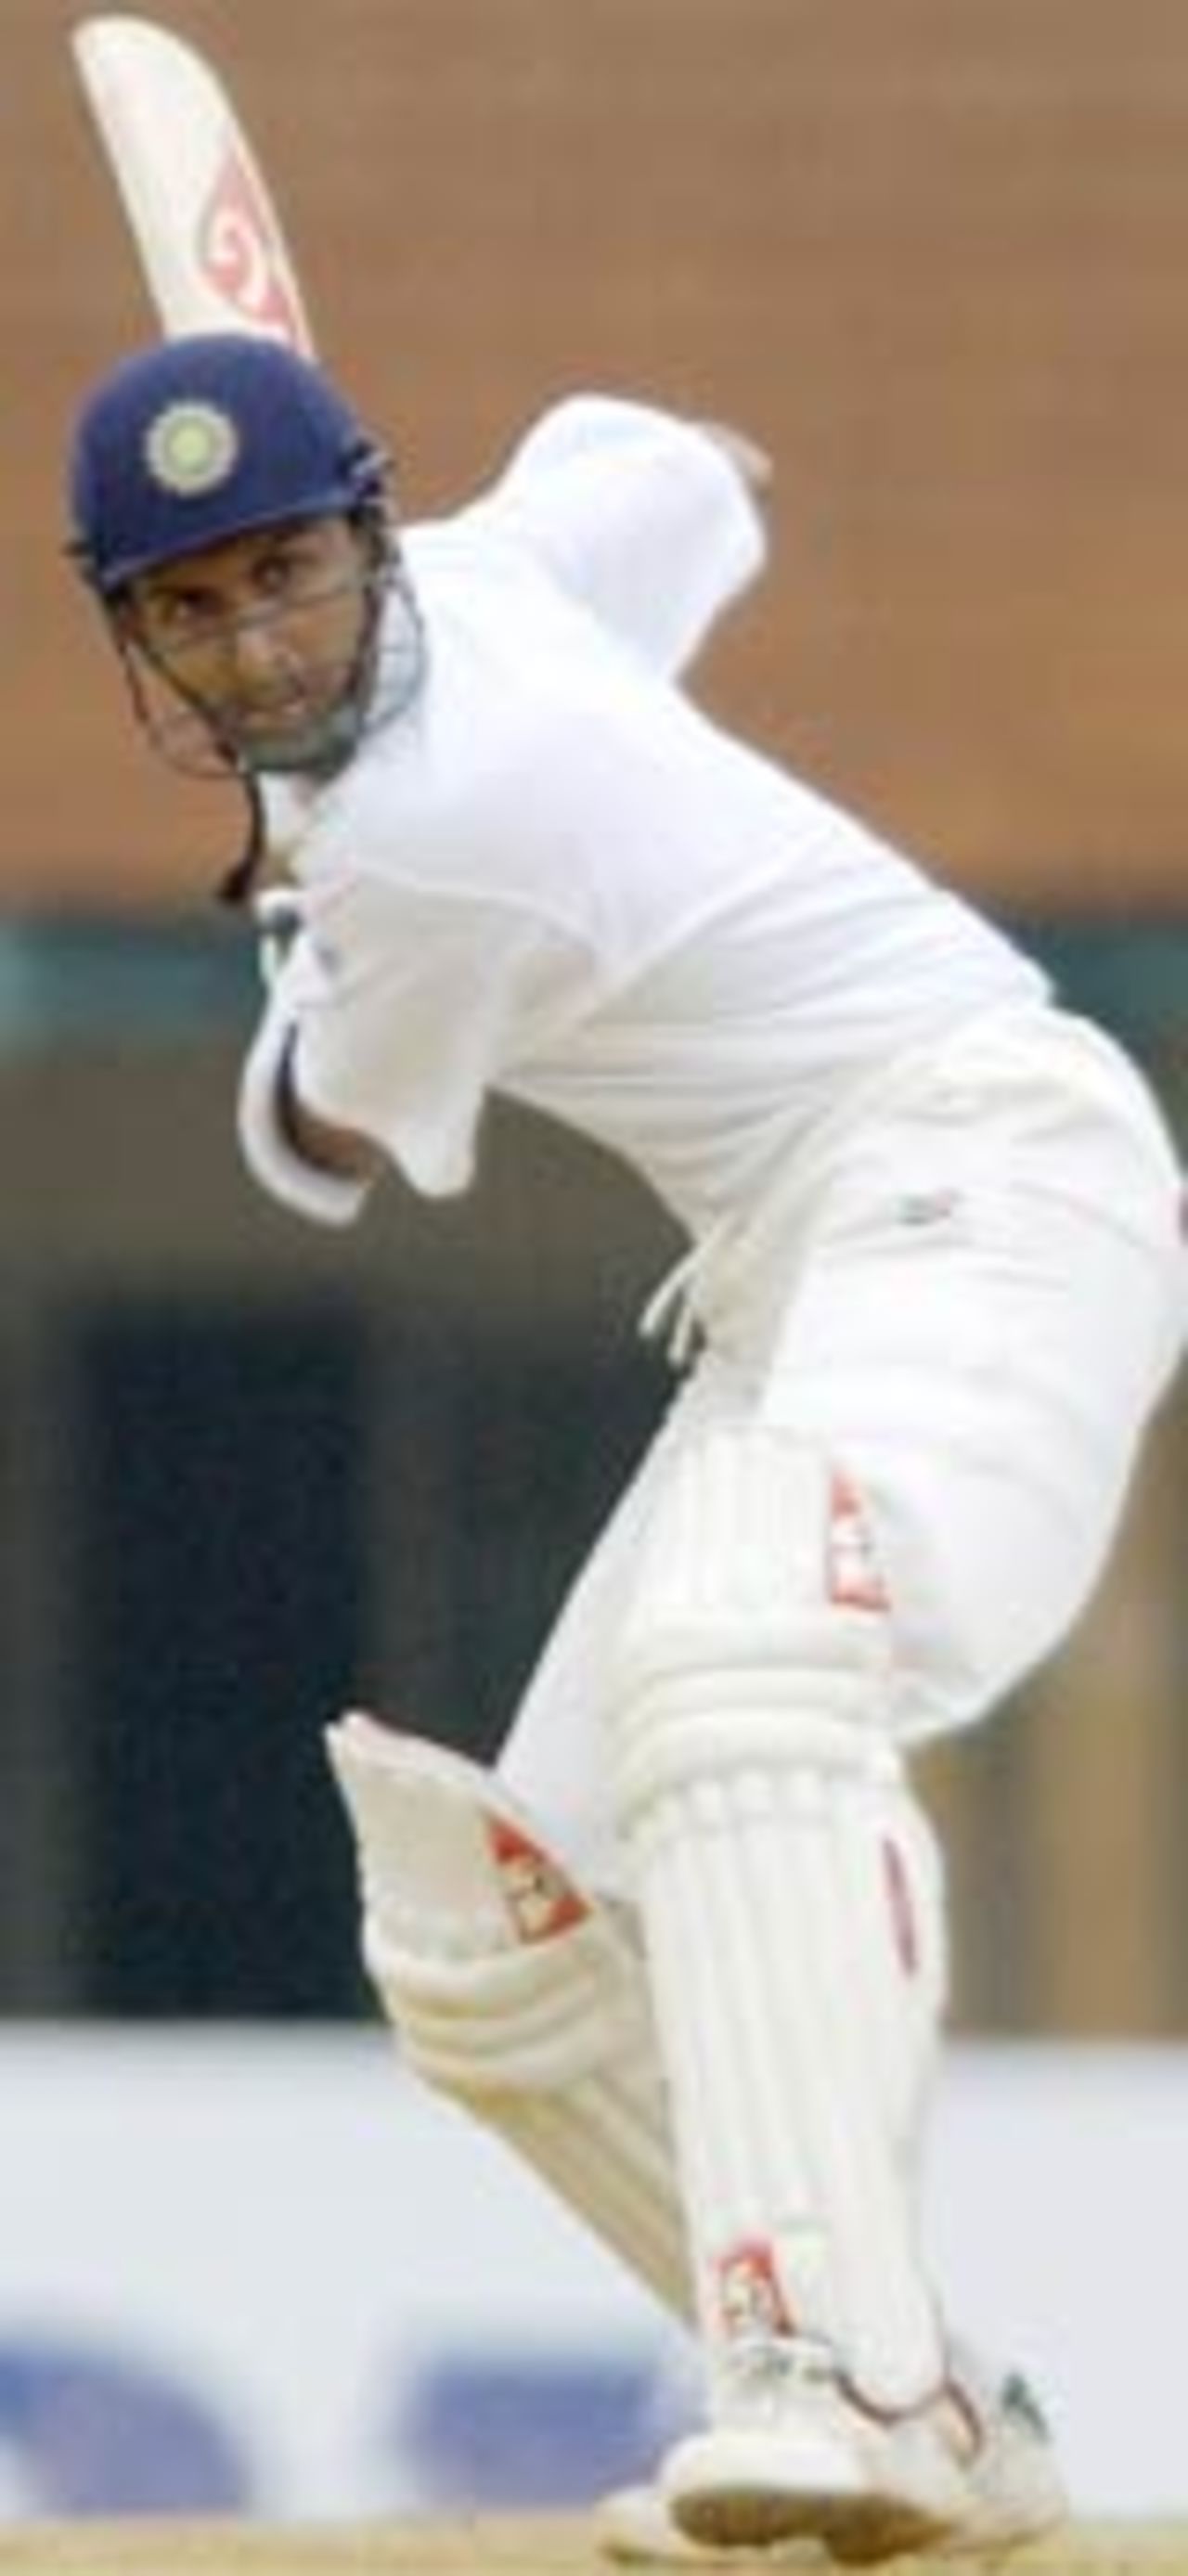 Indian cricketer Sanjay Bangar prepares to play a shot during the second day of the fiveday long Irani Trophy match in Madras, 19 September 2003. The national captain Sourav Ganguly is leading the Rest of India side against a Bombay side captained by Sachin Tendulkar